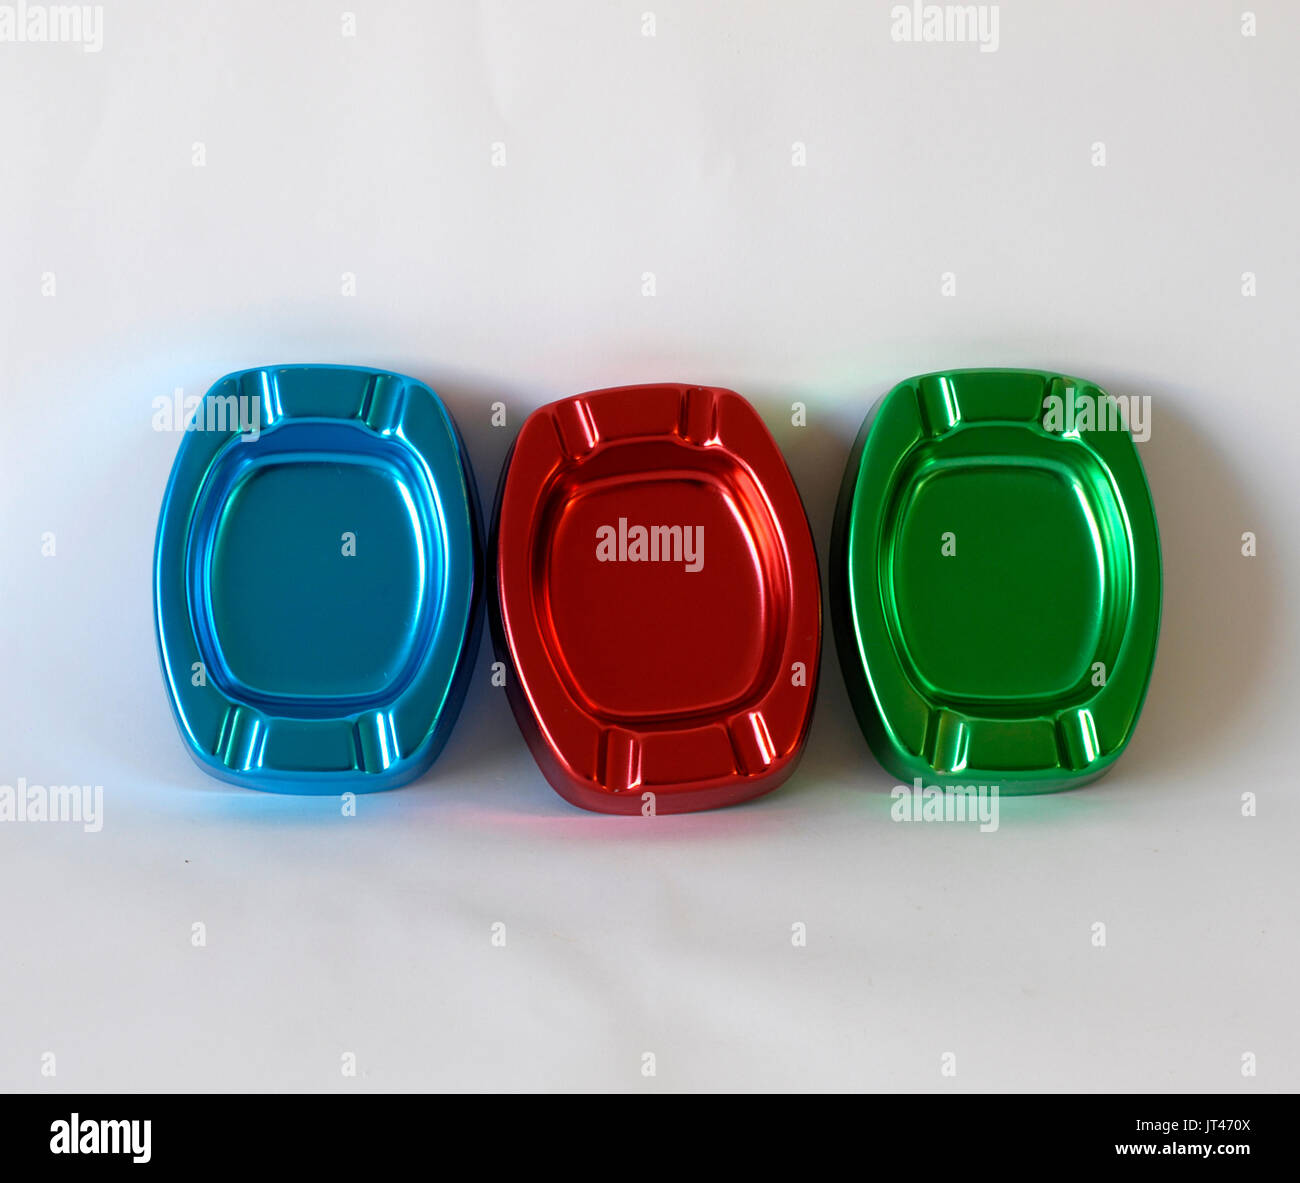 Three colorful ashtrays made by anodized aluminum, colors blue, red and green. For cigarettes smokers. Smoke Cigarette Stock Photo